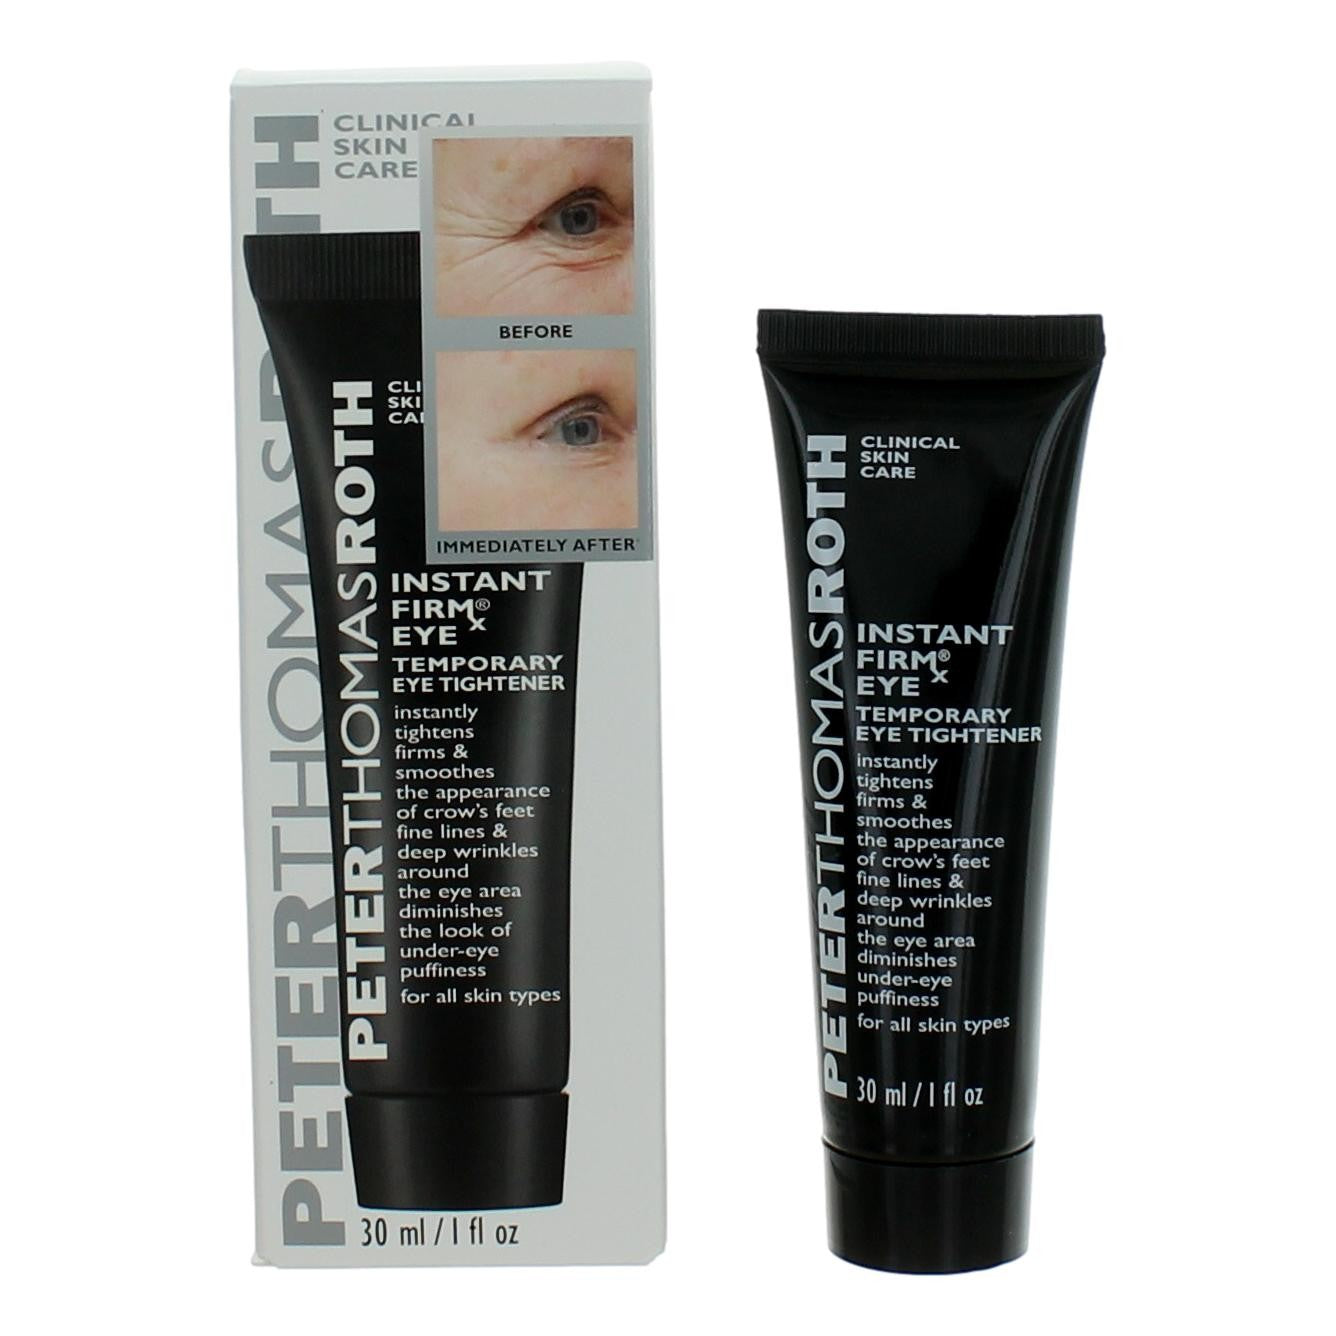 Peter Thomas Roth Instant FIRMX by Peter Thomas Roth 1oz Temporary Eye Tightener